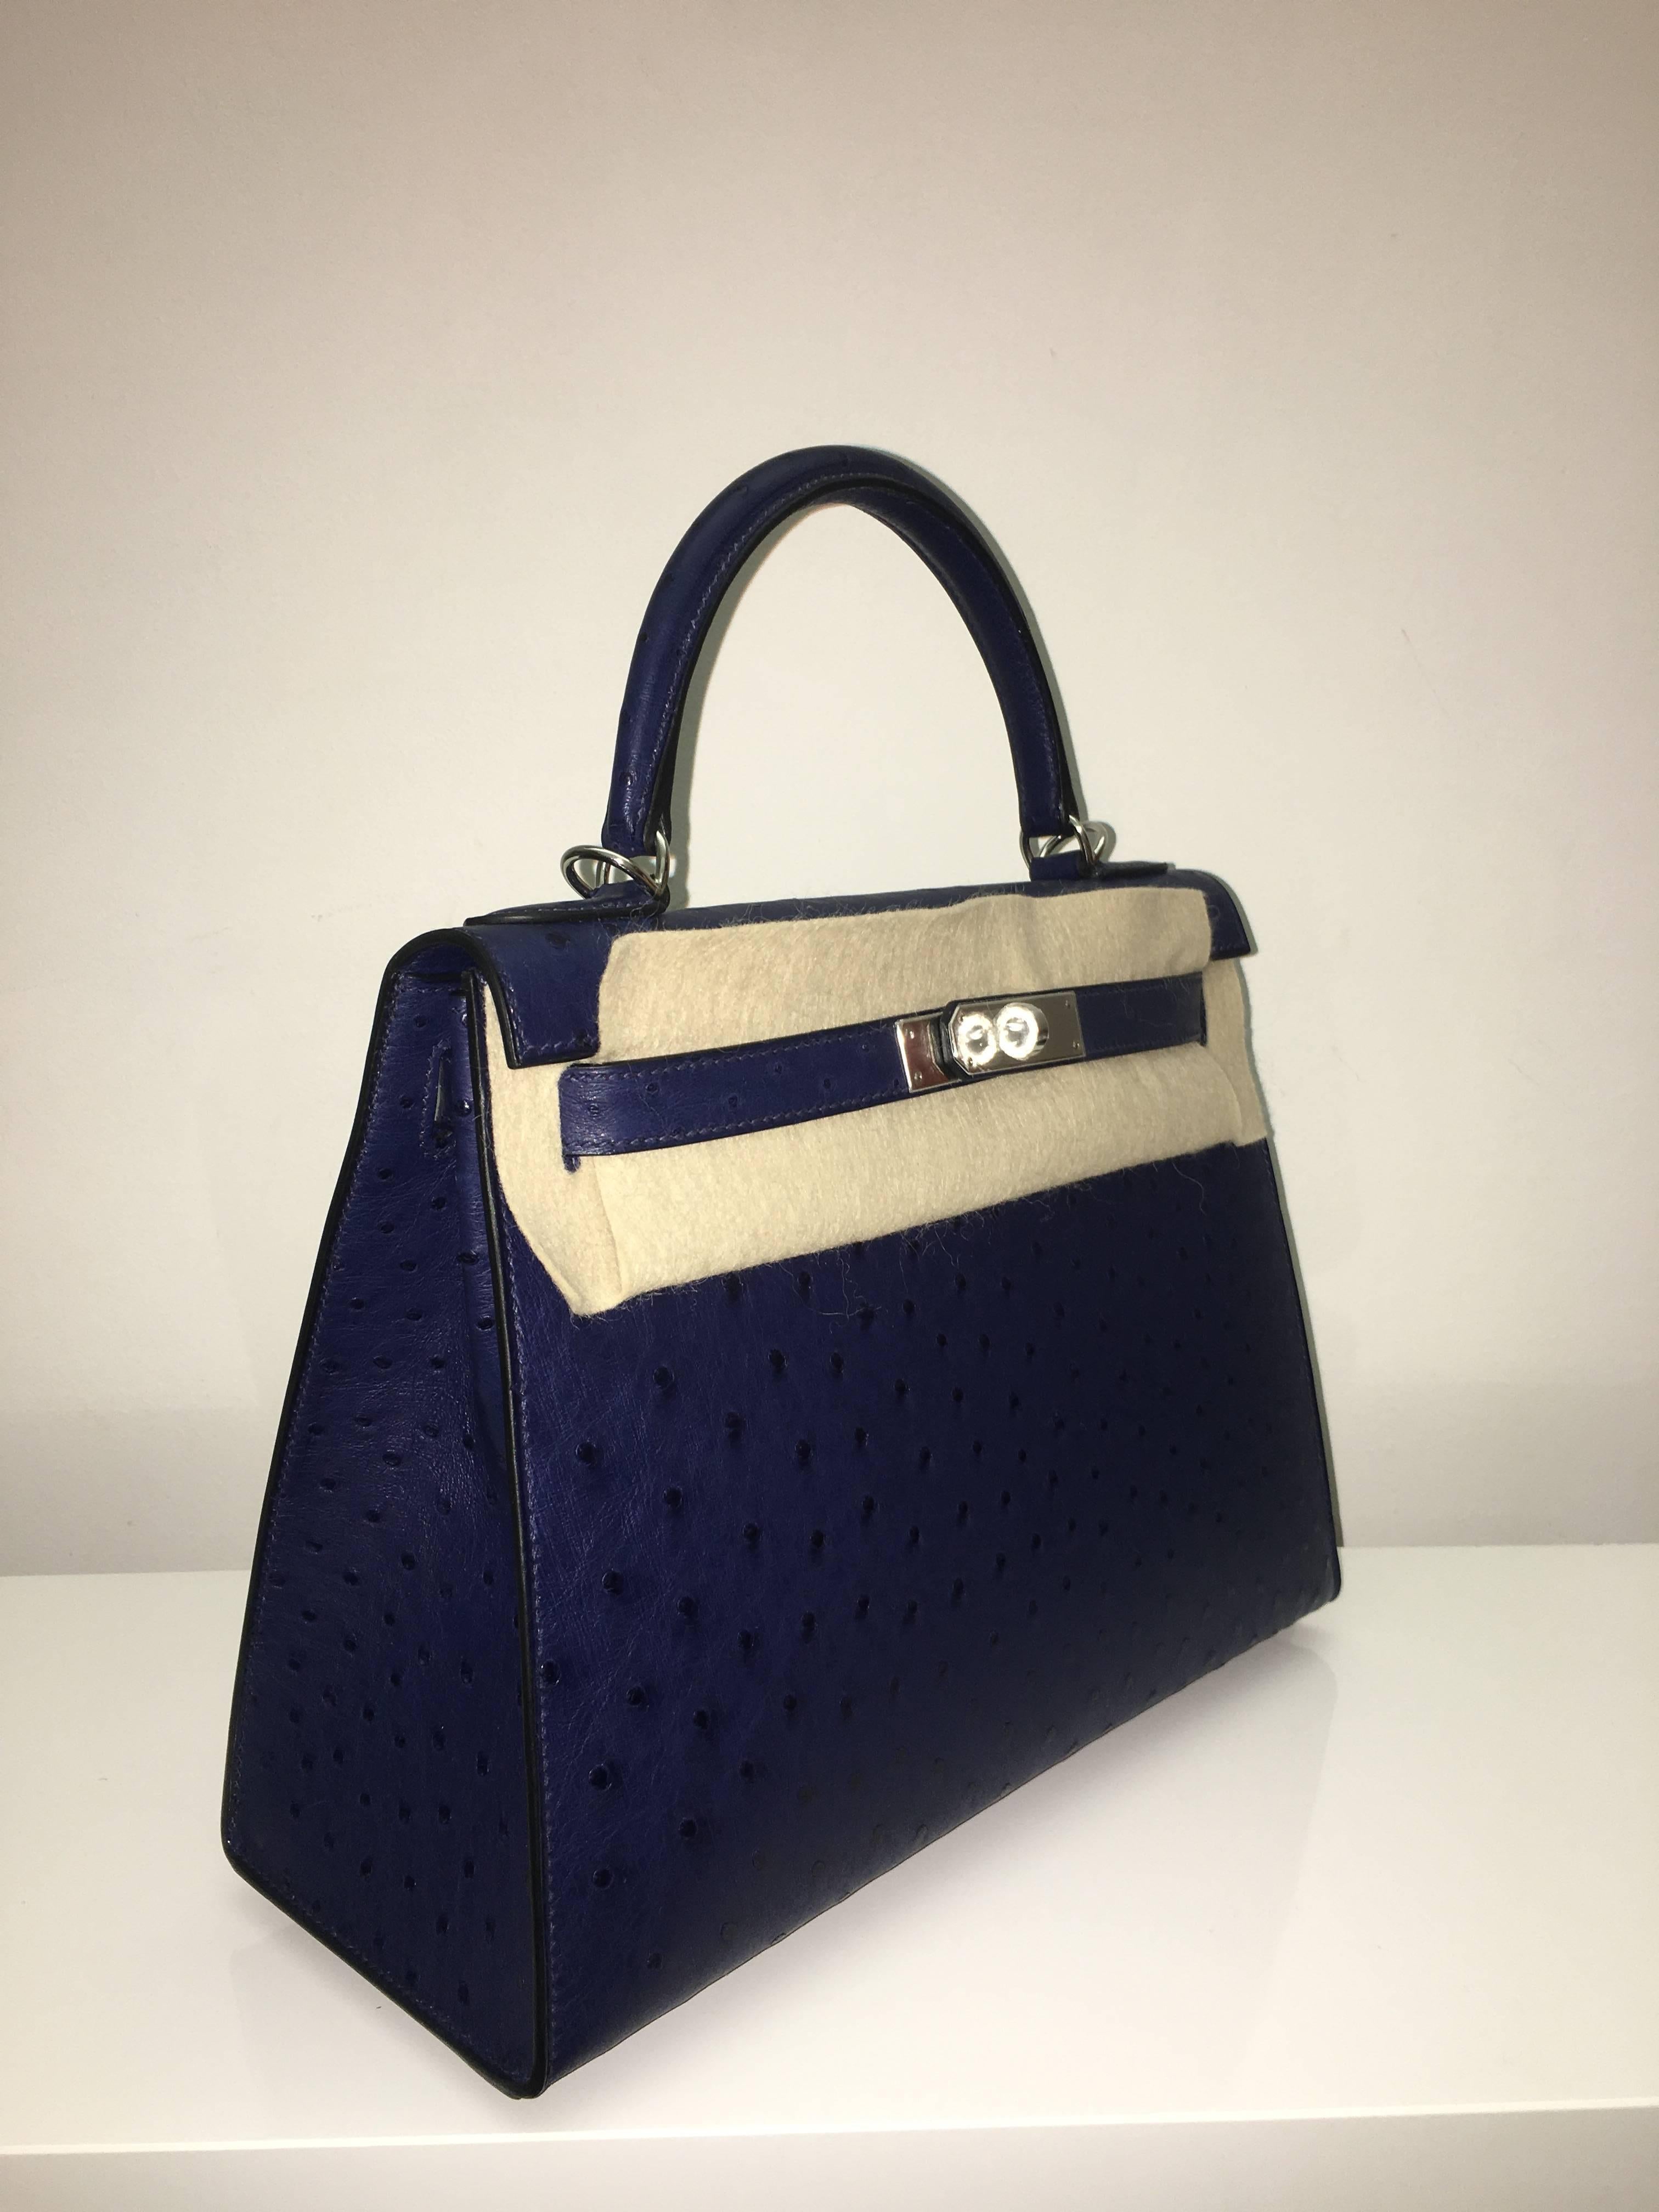 Hermes 
Kelly Size 28
Ostrich Skin
Colour Blue Iris
Silver (palladium) Hardware 
store fresh, comes with receipt and full set (dust bag, box...) 
Hydeparkfashion specializes in sourcing and delivering authentic luxury handbags, mainly Hermes,